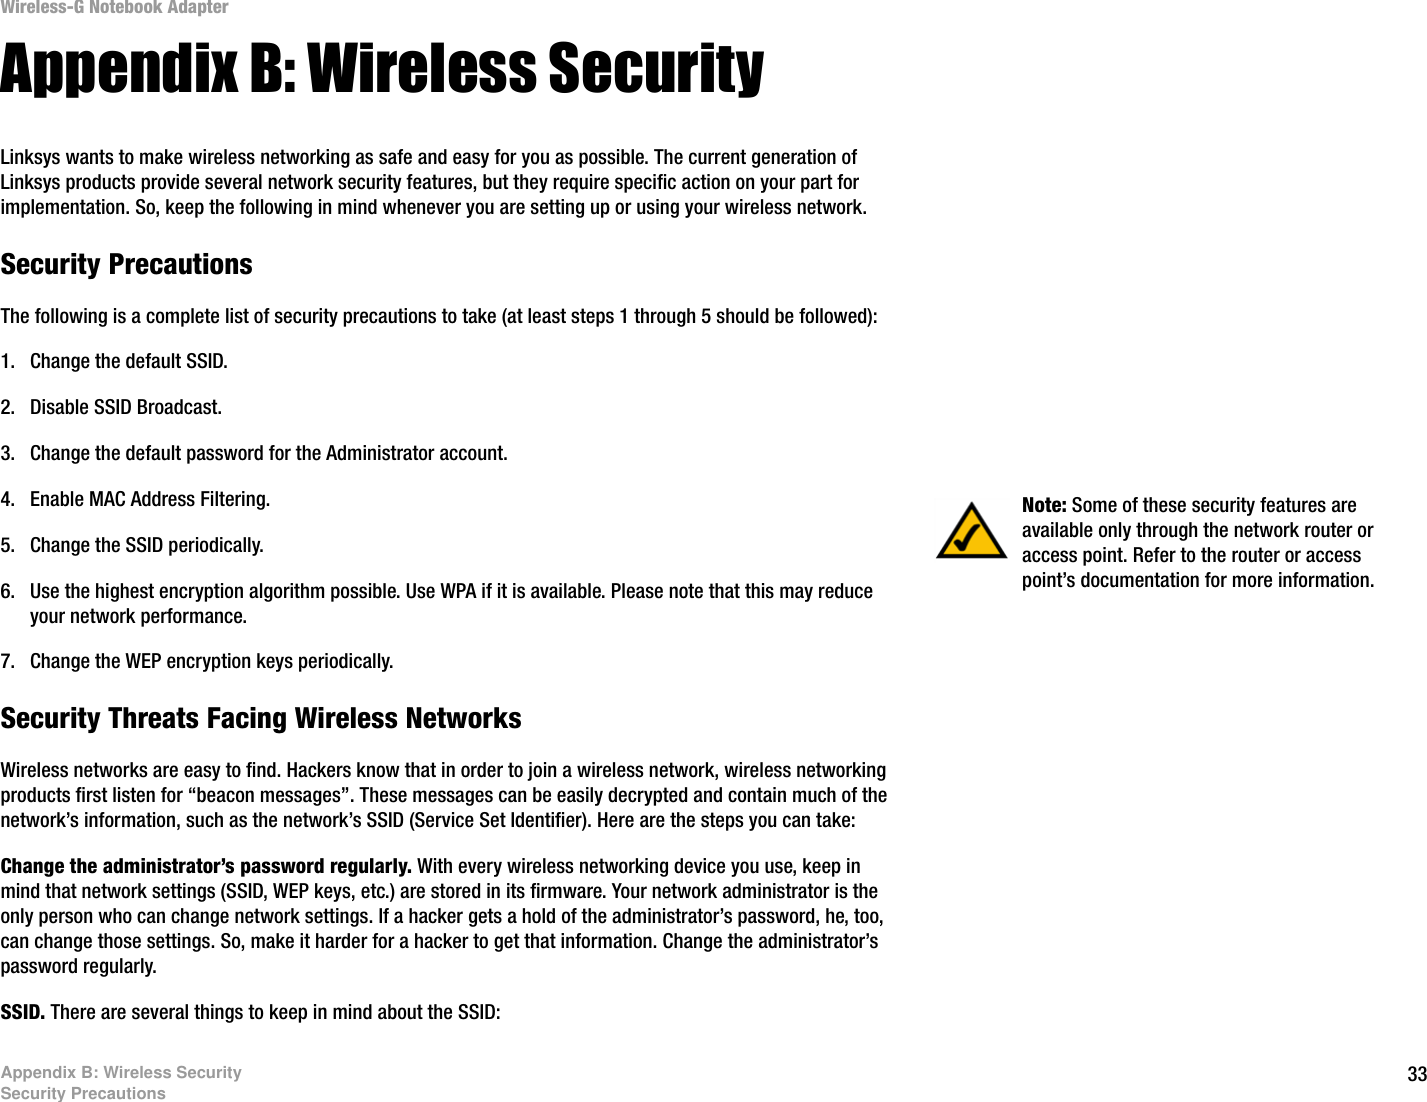 33Appendix B: Wireless SecuritySecurity PrecautionsWireless-G Notebook AdapterAppendix B: Wireless SecurityLinksys wants to make wireless networking as safe and easy for you as possible. The current generation of Linksys products provide several network security features, but they require specific action on your part for implementation. So, keep the following in mind whenever you are setting up or using your wireless network.Security PrecautionsThe following is a complete list of security precautions to take (at least steps 1 through 5 should be followed):1. Change the default SSID. 2. Disable SSID Broadcast. 3. Change the default password for the Administrator account. 4. Enable MAC Address Filtering. 5. Change the SSID periodically. 6. Use the highest encryption algorithm possible. Use WPA if it is available. Please note that this may reduce your network performance. 7. Change the WEP encryption keys periodically. Security Threats Facing Wireless Networks Wireless networks are easy to find. Hackers know that in order to join a wireless network, wireless networking products first listen for “beacon messages”. These messages can be easily decrypted and contain much of the network’s information, such as the network’s SSID (Service Set Identifier). Here are the steps you can take:Change the administrator’s password regularly. With every wireless networking device you use, keep in mind that network settings (SSID, WEP keys, etc.) are stored in its firmware. Your network administrator is the only person who can change network settings. If a hacker gets a hold of the administrator’s password, he, too, can change those settings. So, make it harder for a hacker to get that information. Change the administrator’s password regularly.SSID. There are several things to keep in mind about the SSID: Note: Some of these security features are available only through the network router or access point. Refer to the router or access point’s documentation for more information.